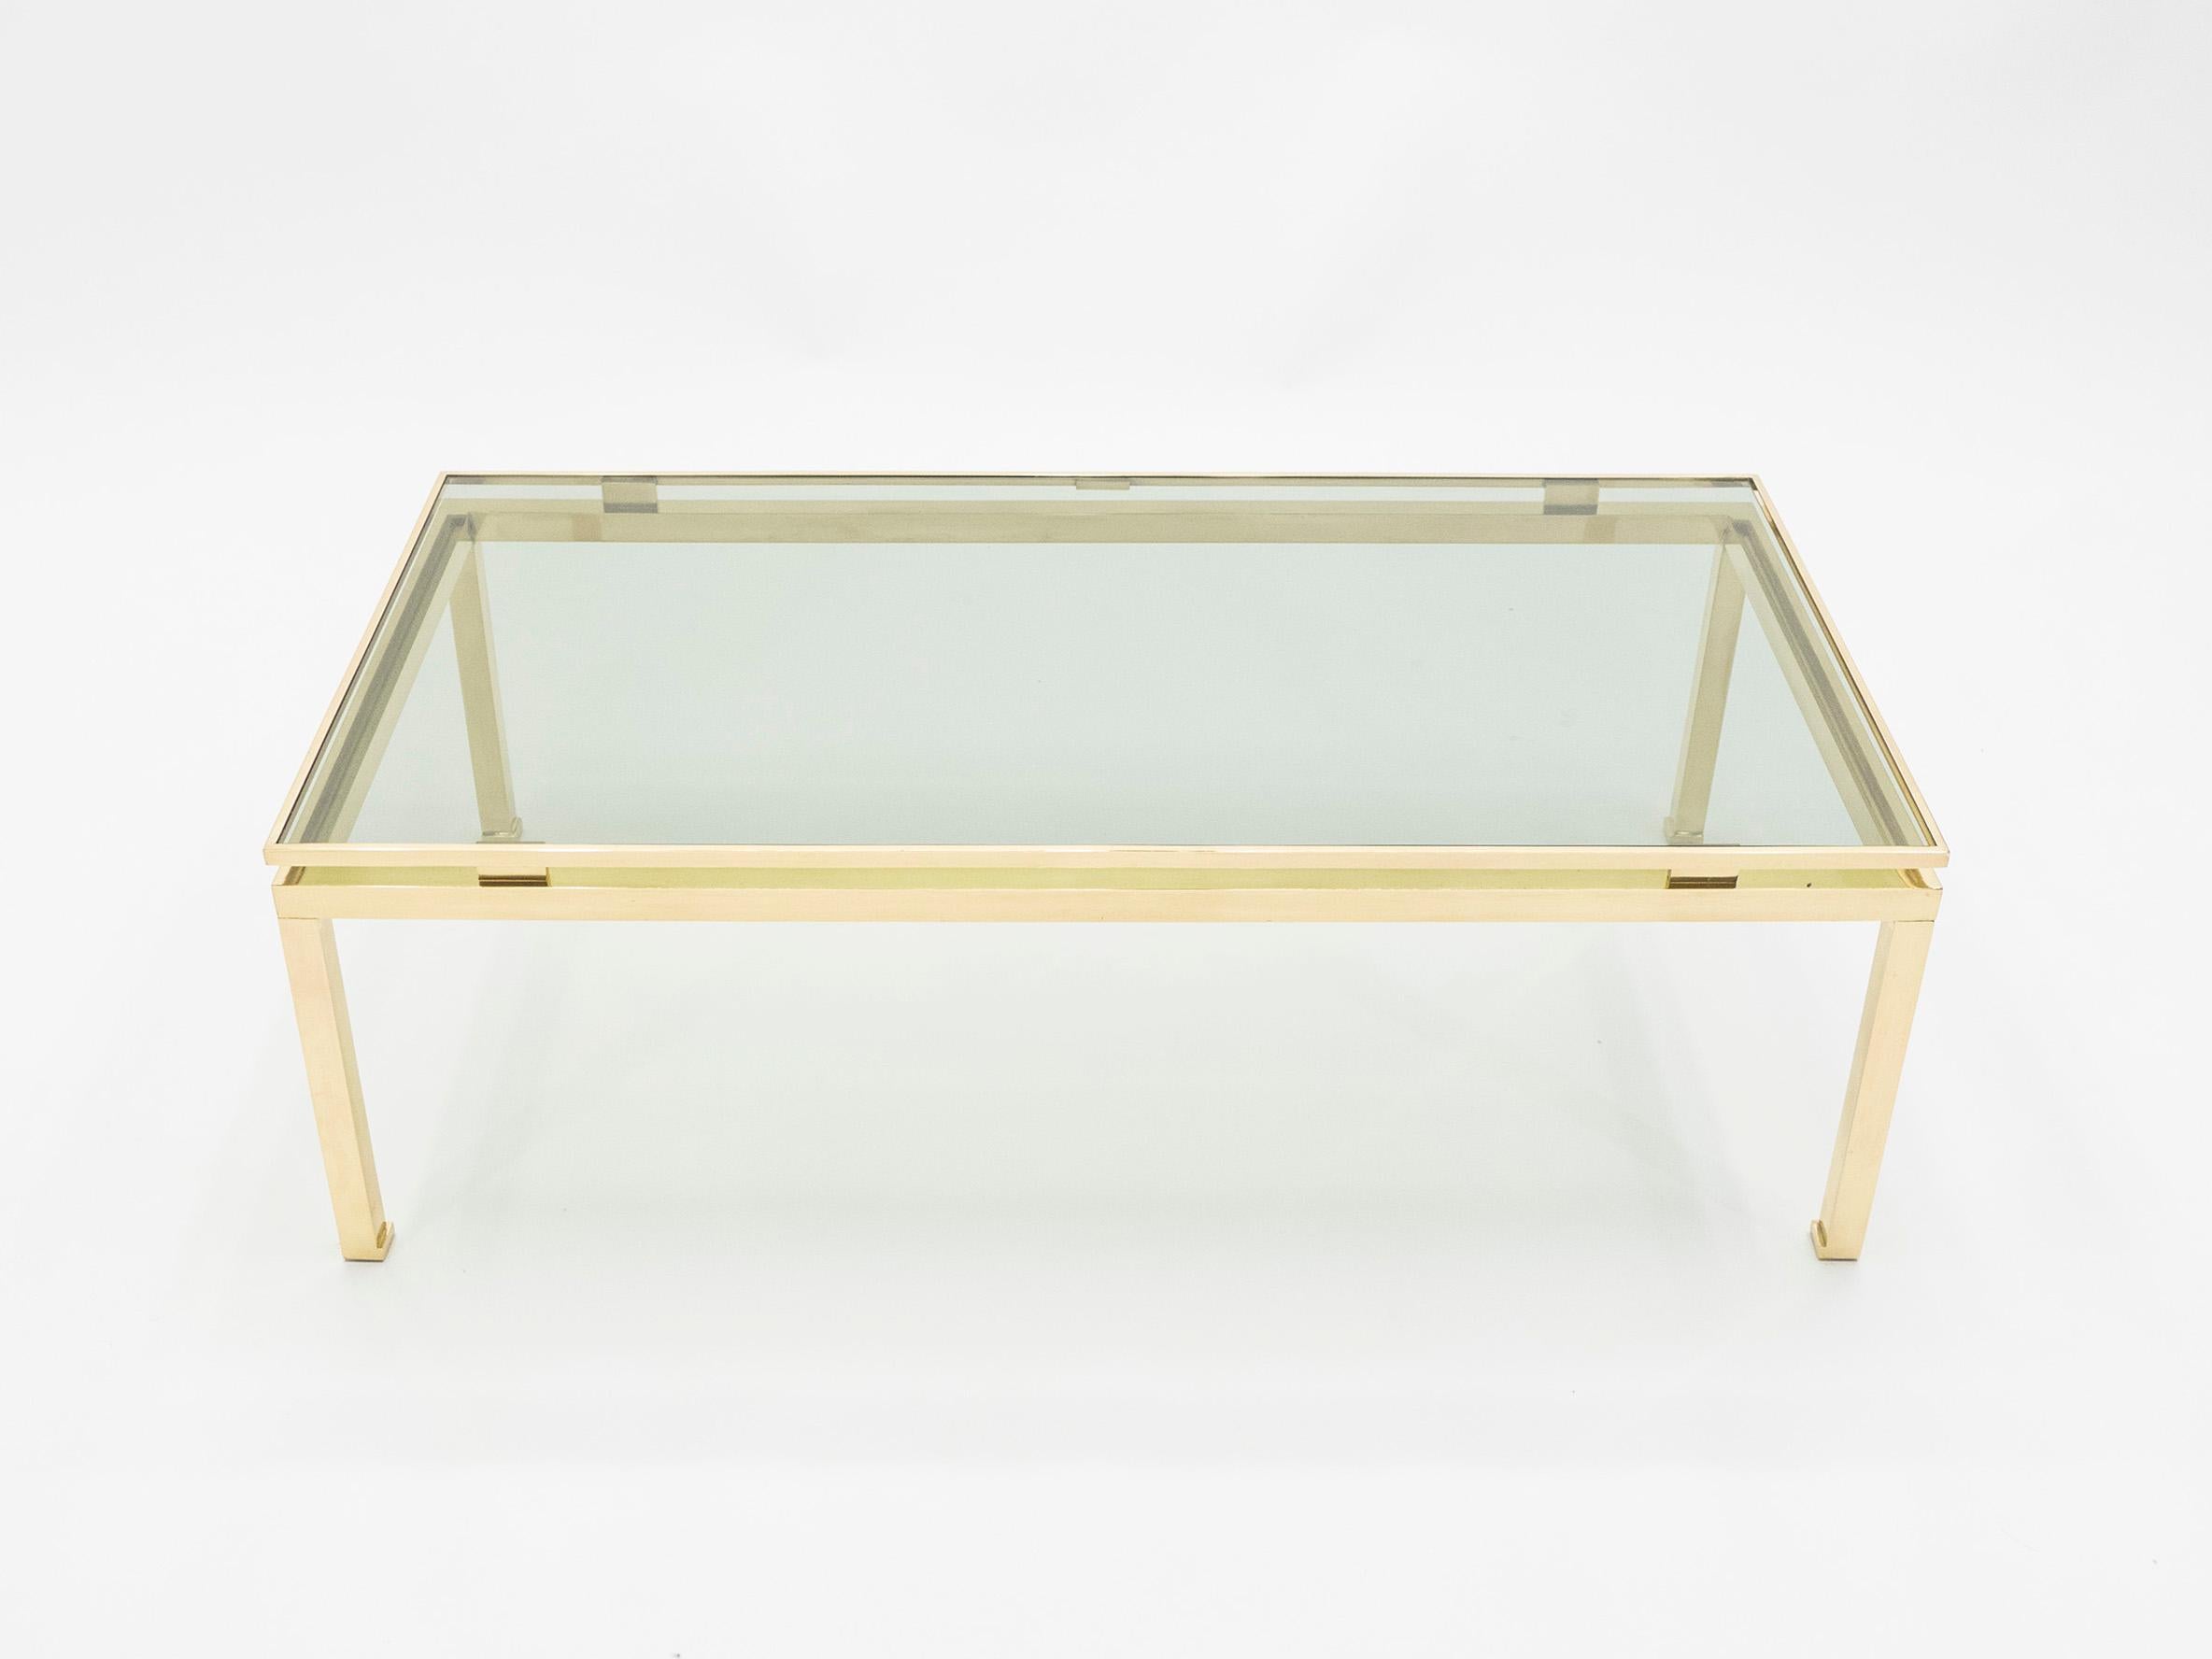 Simple lines and shiny point to this coffee table’s French Hollywood Regency roots. Designed by Guy Lefevre for Maison Jansen, it features shiny brass legs and a lightly smoked glass top. Its symmetry, elevated glass, and strong architectural design